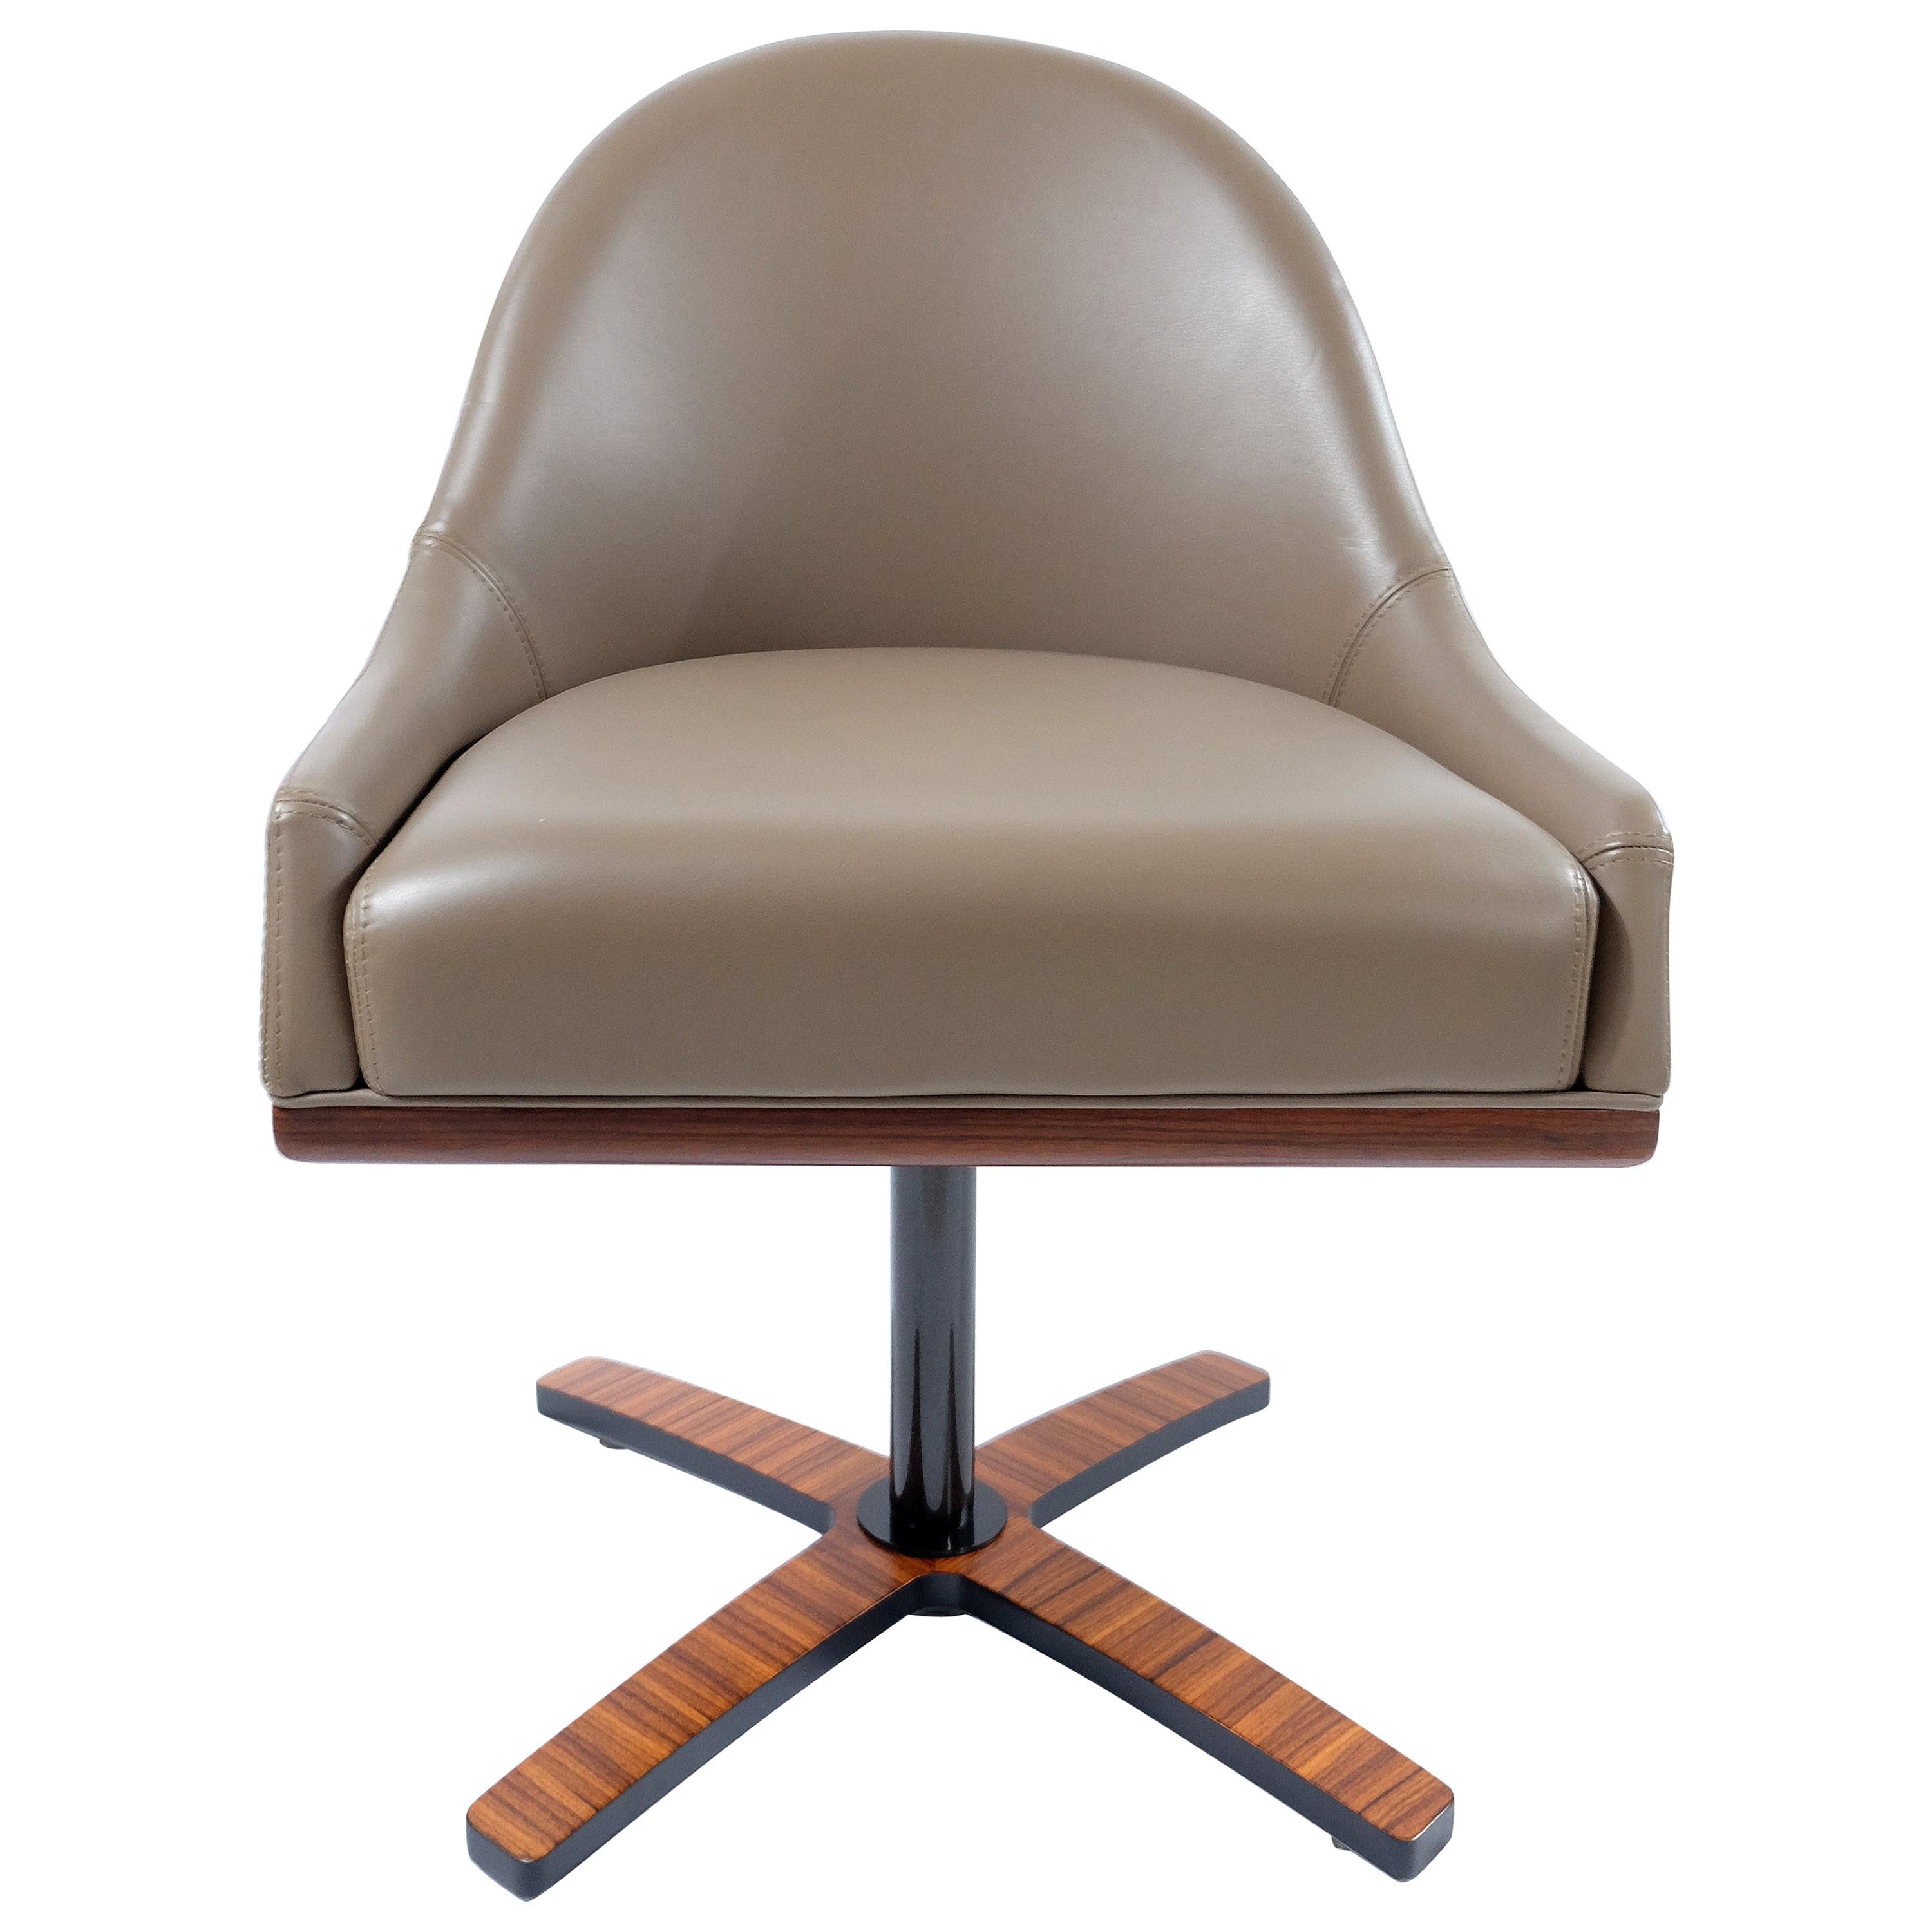 Mobilidea "Chic" Swivel Desk Leather Chairs, Pair of 2 For Sale